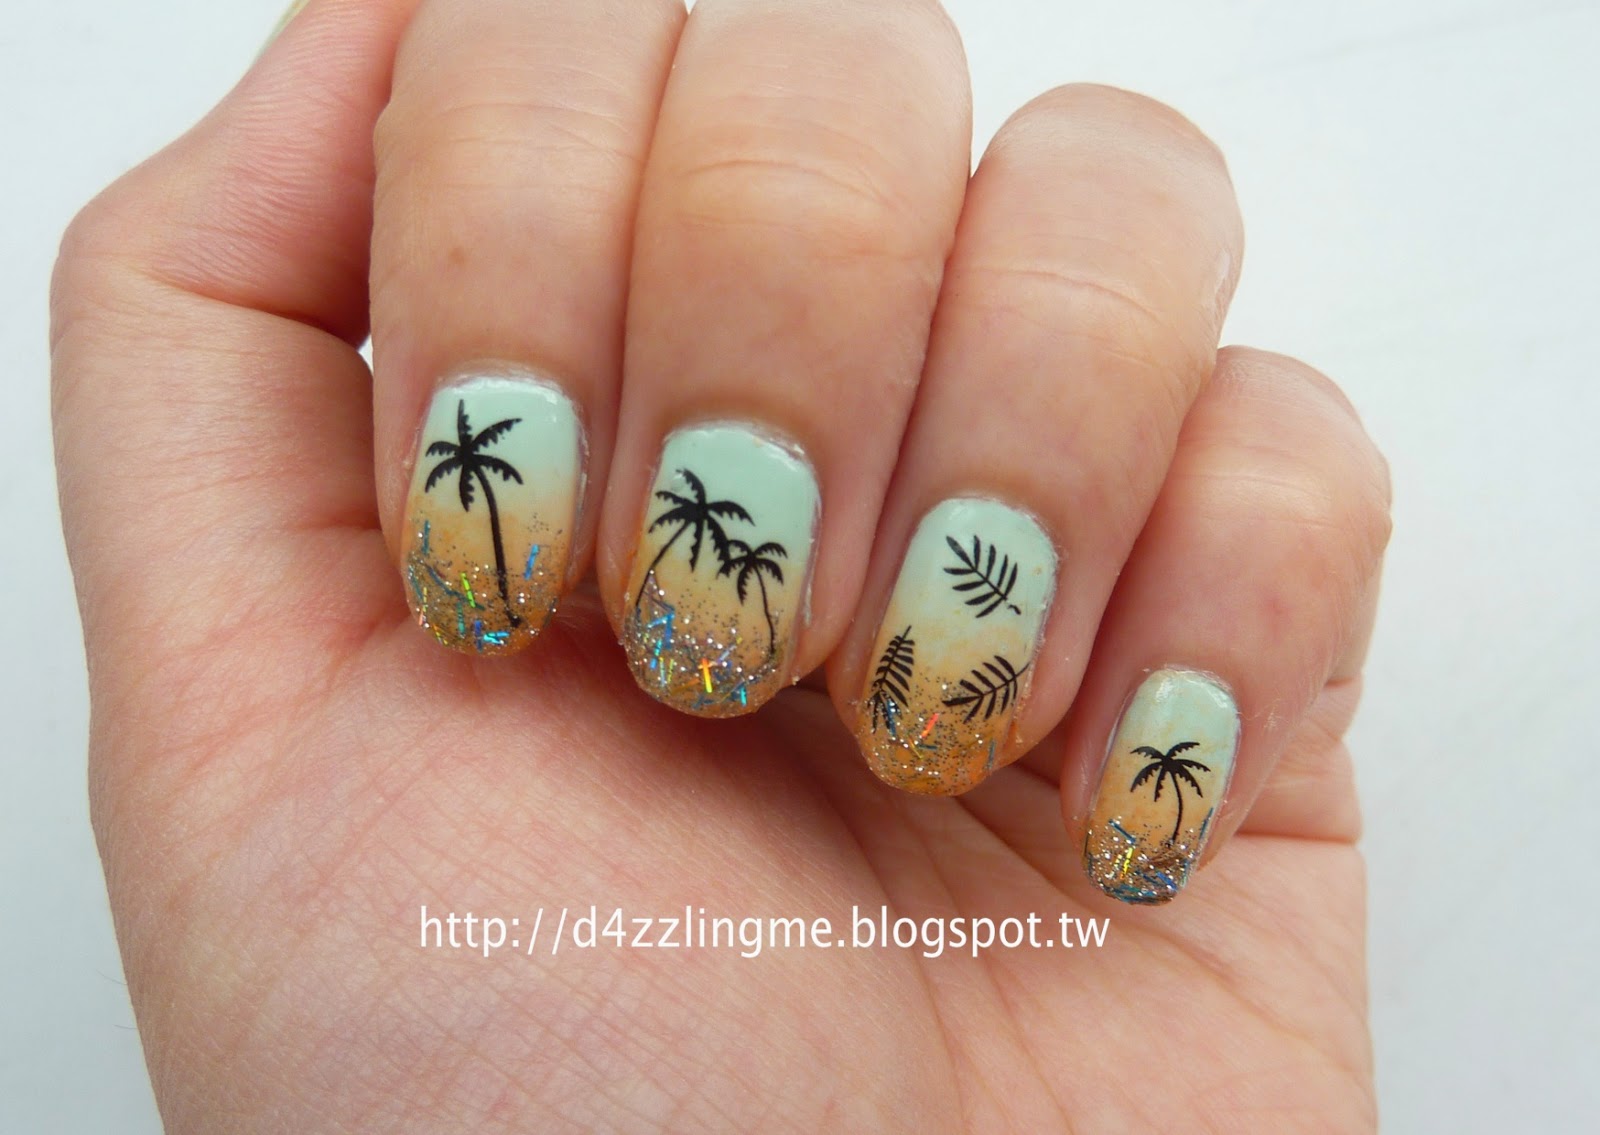 10. Coconut Water Nail Art - wide 6